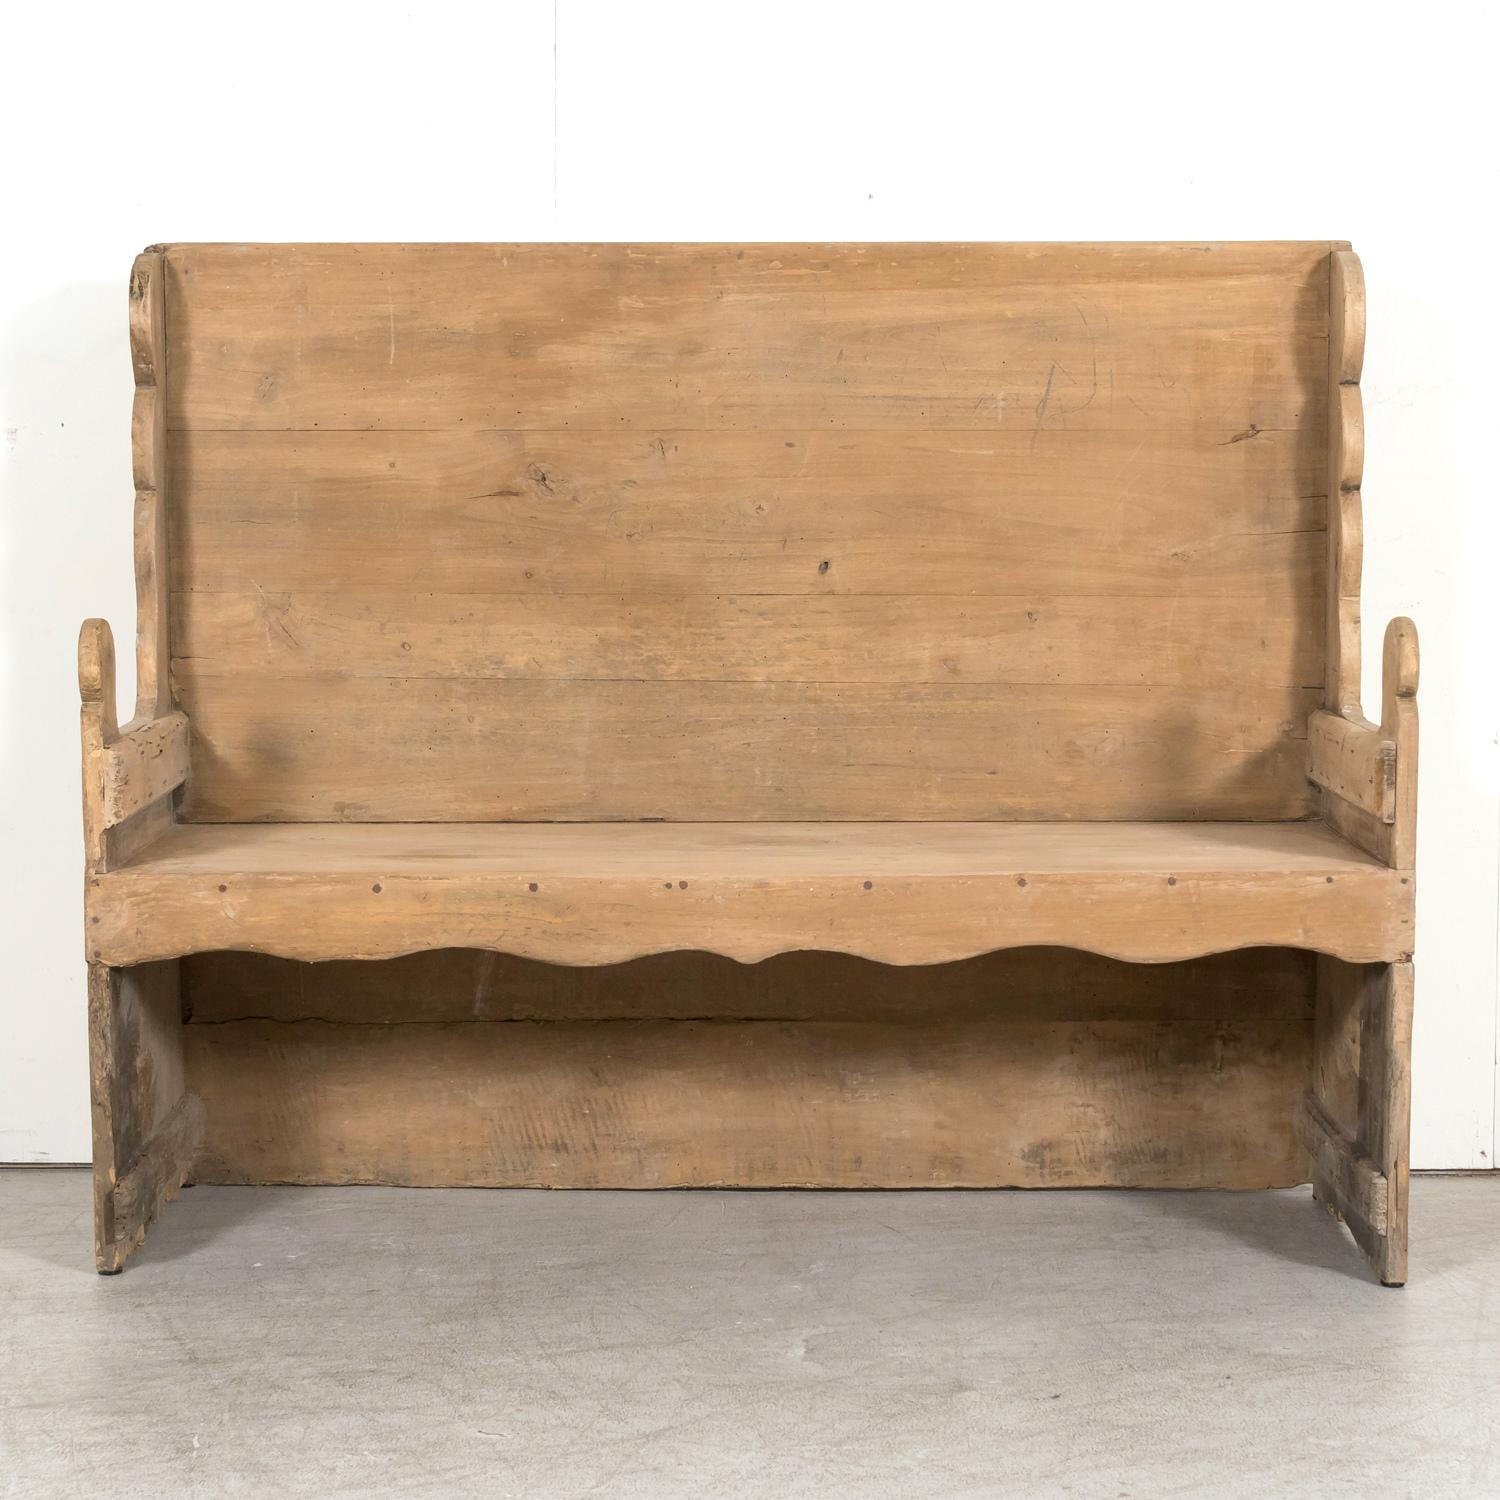 Late 18th Century Carved Primitive Spanish Catalan Settle Bench  In Good Condition For Sale In Birmingham, AL